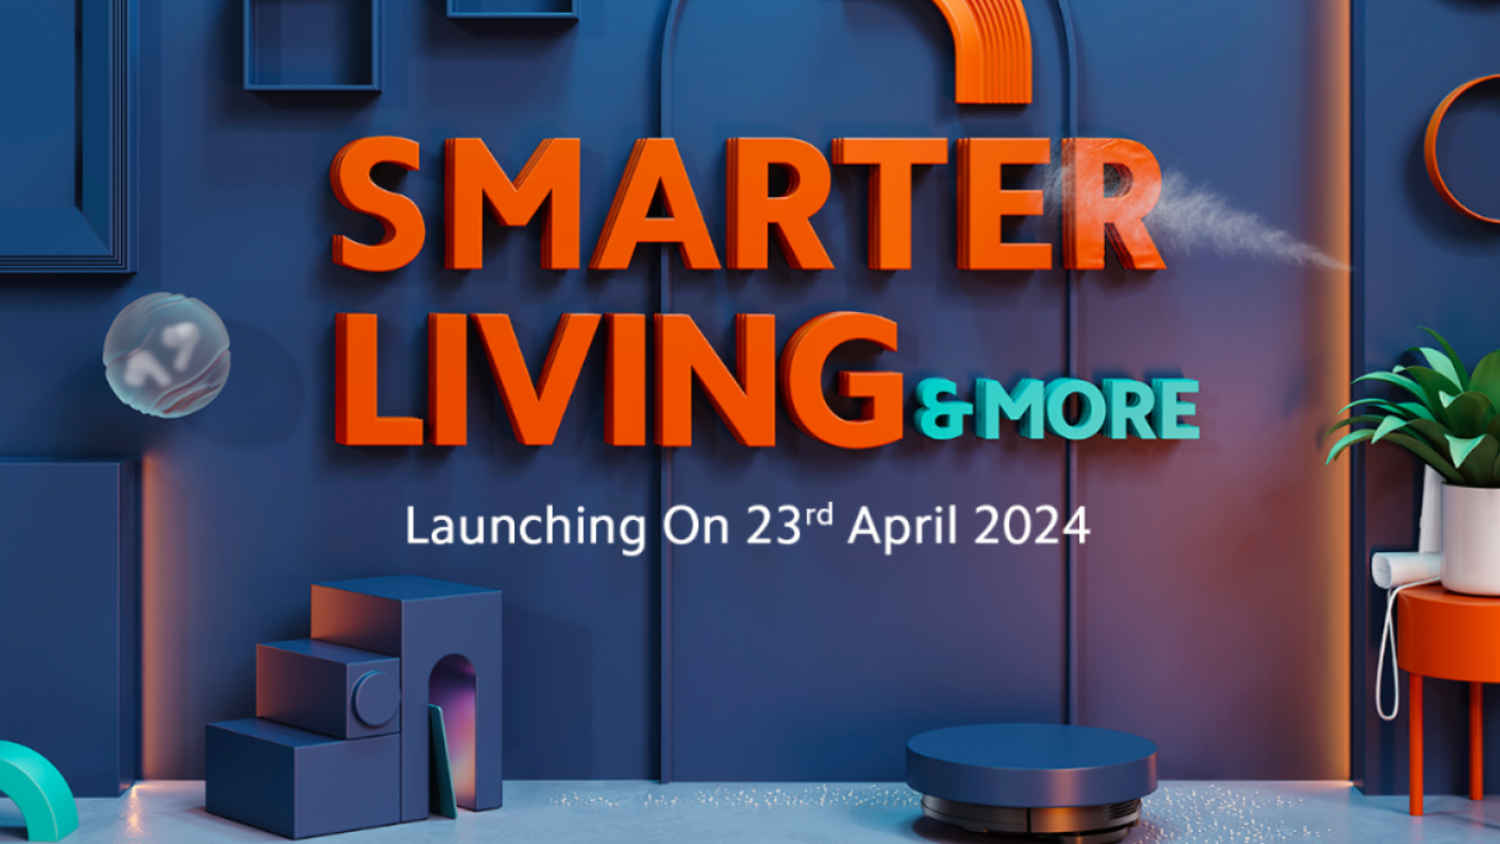 Xiaomi Smarter Living 2024 scheduled for April 23 in India: New TWS earbuds, tablet & more expected